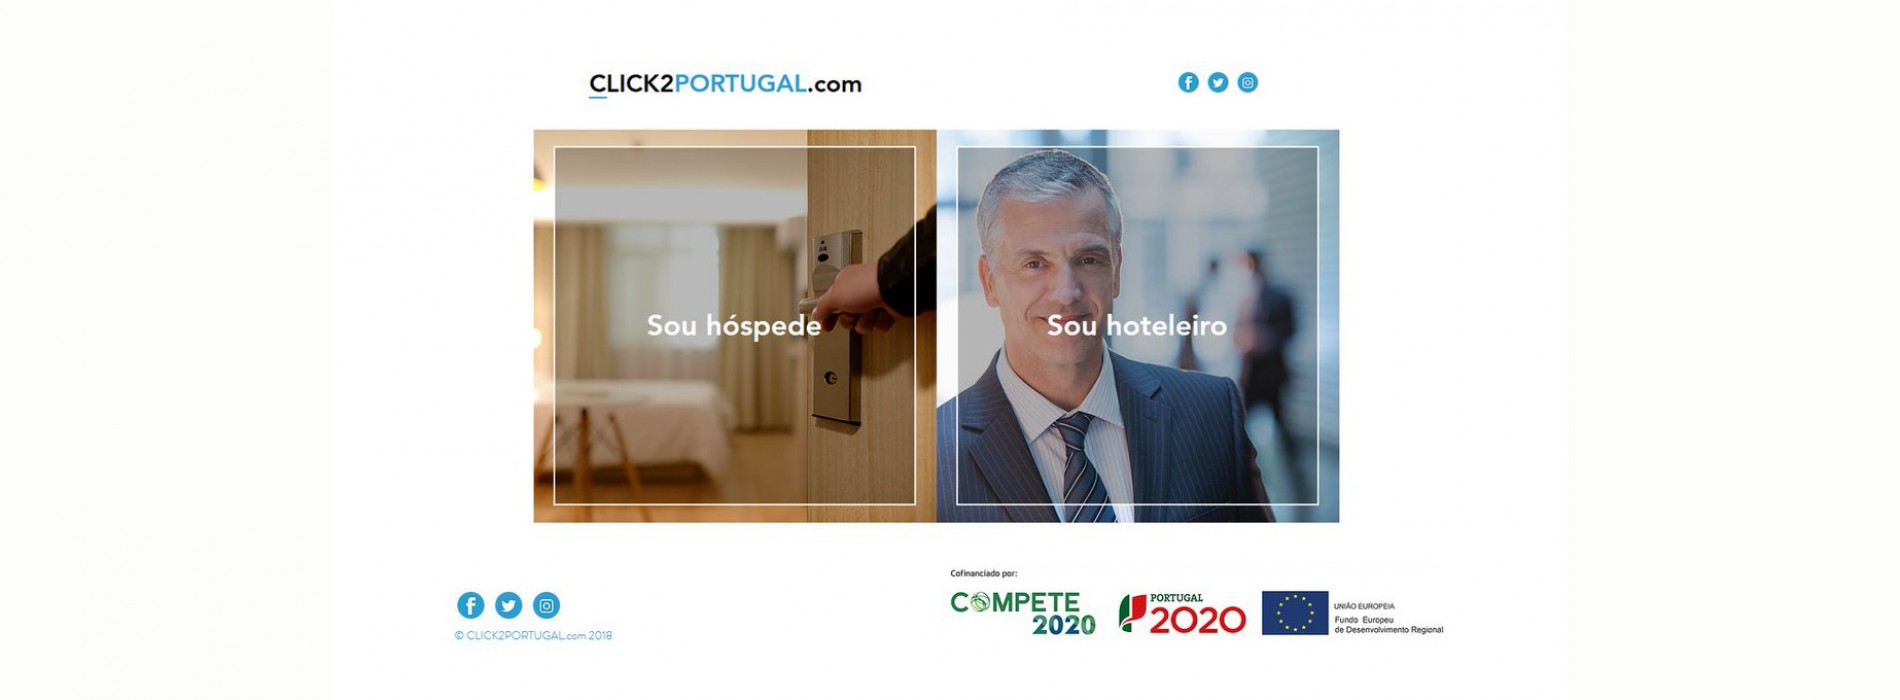 Portuguese Hotels Association to launch online booking portal to welcome international visitors